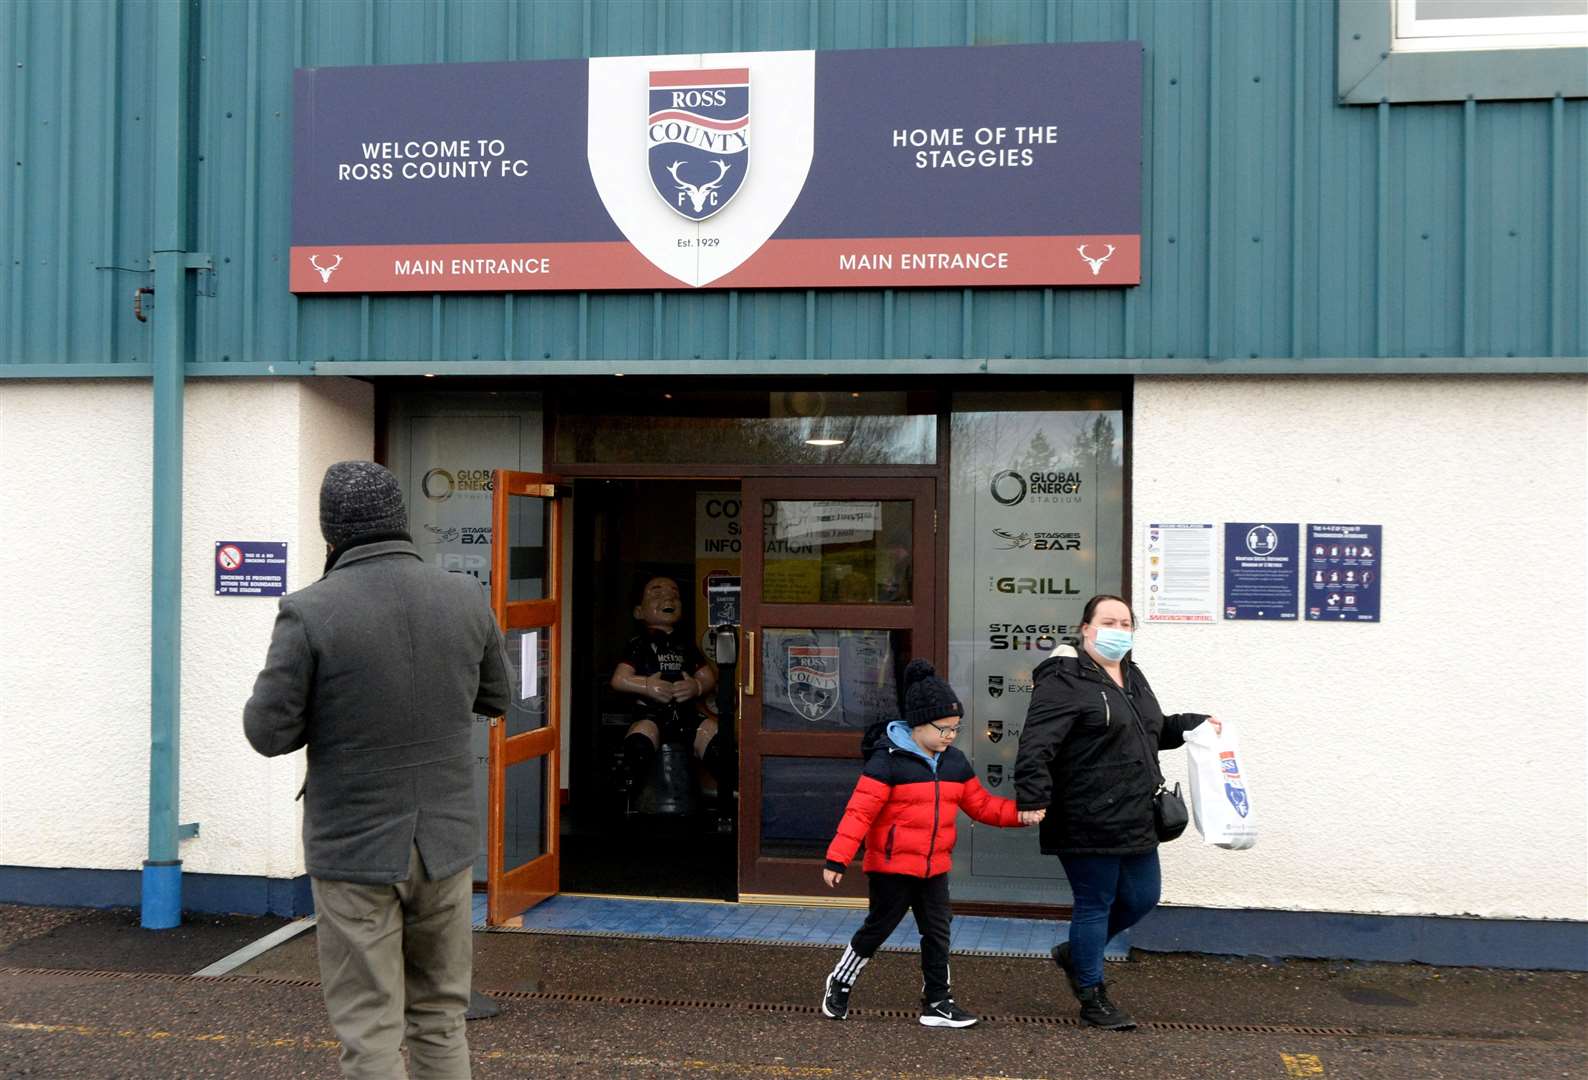 Debate about the idea of Ross County and Caley Thistle merging has been fierce.